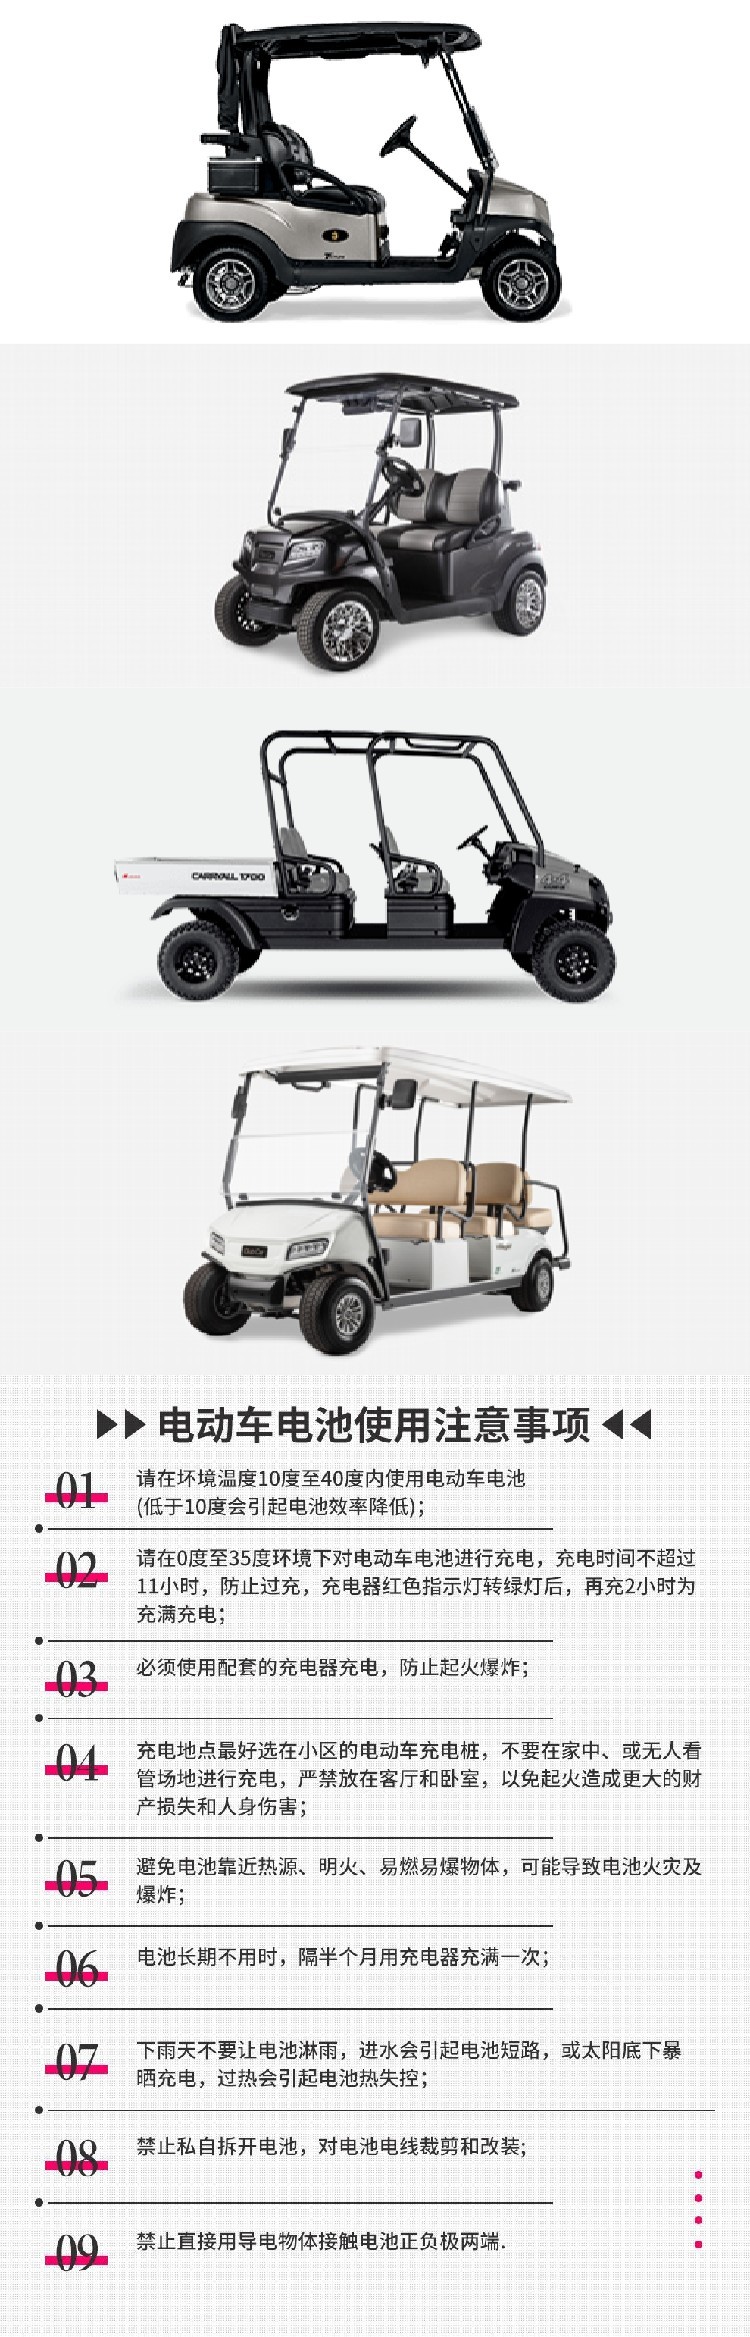 Craboka Clubcar Golf Cart has a compact body and flexible steering, equipped with an intelligent golf cart system